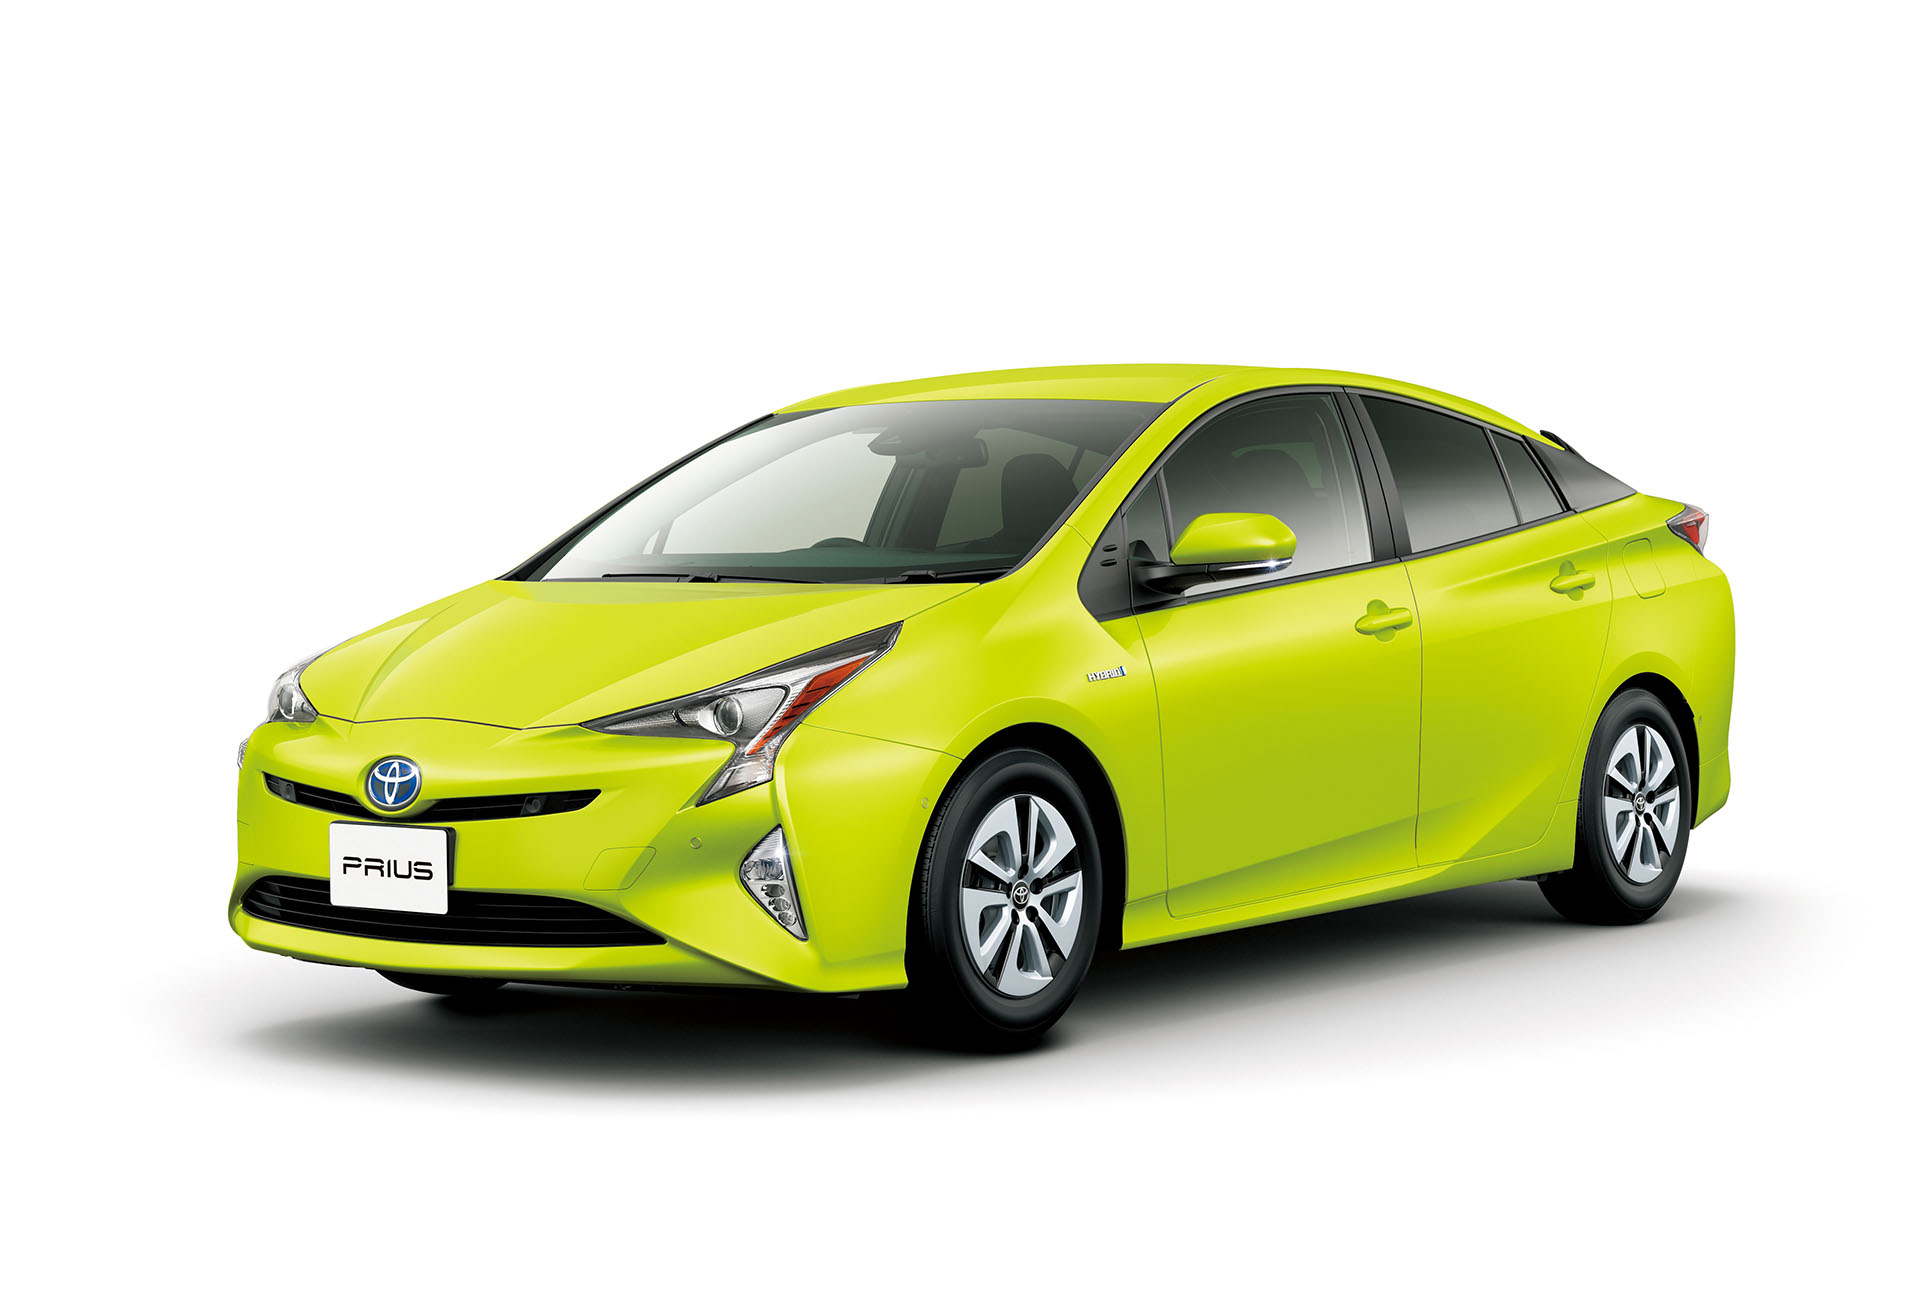 Lime Green Toyota Prius Paint Reduces Fuel Consumption The News Wheel